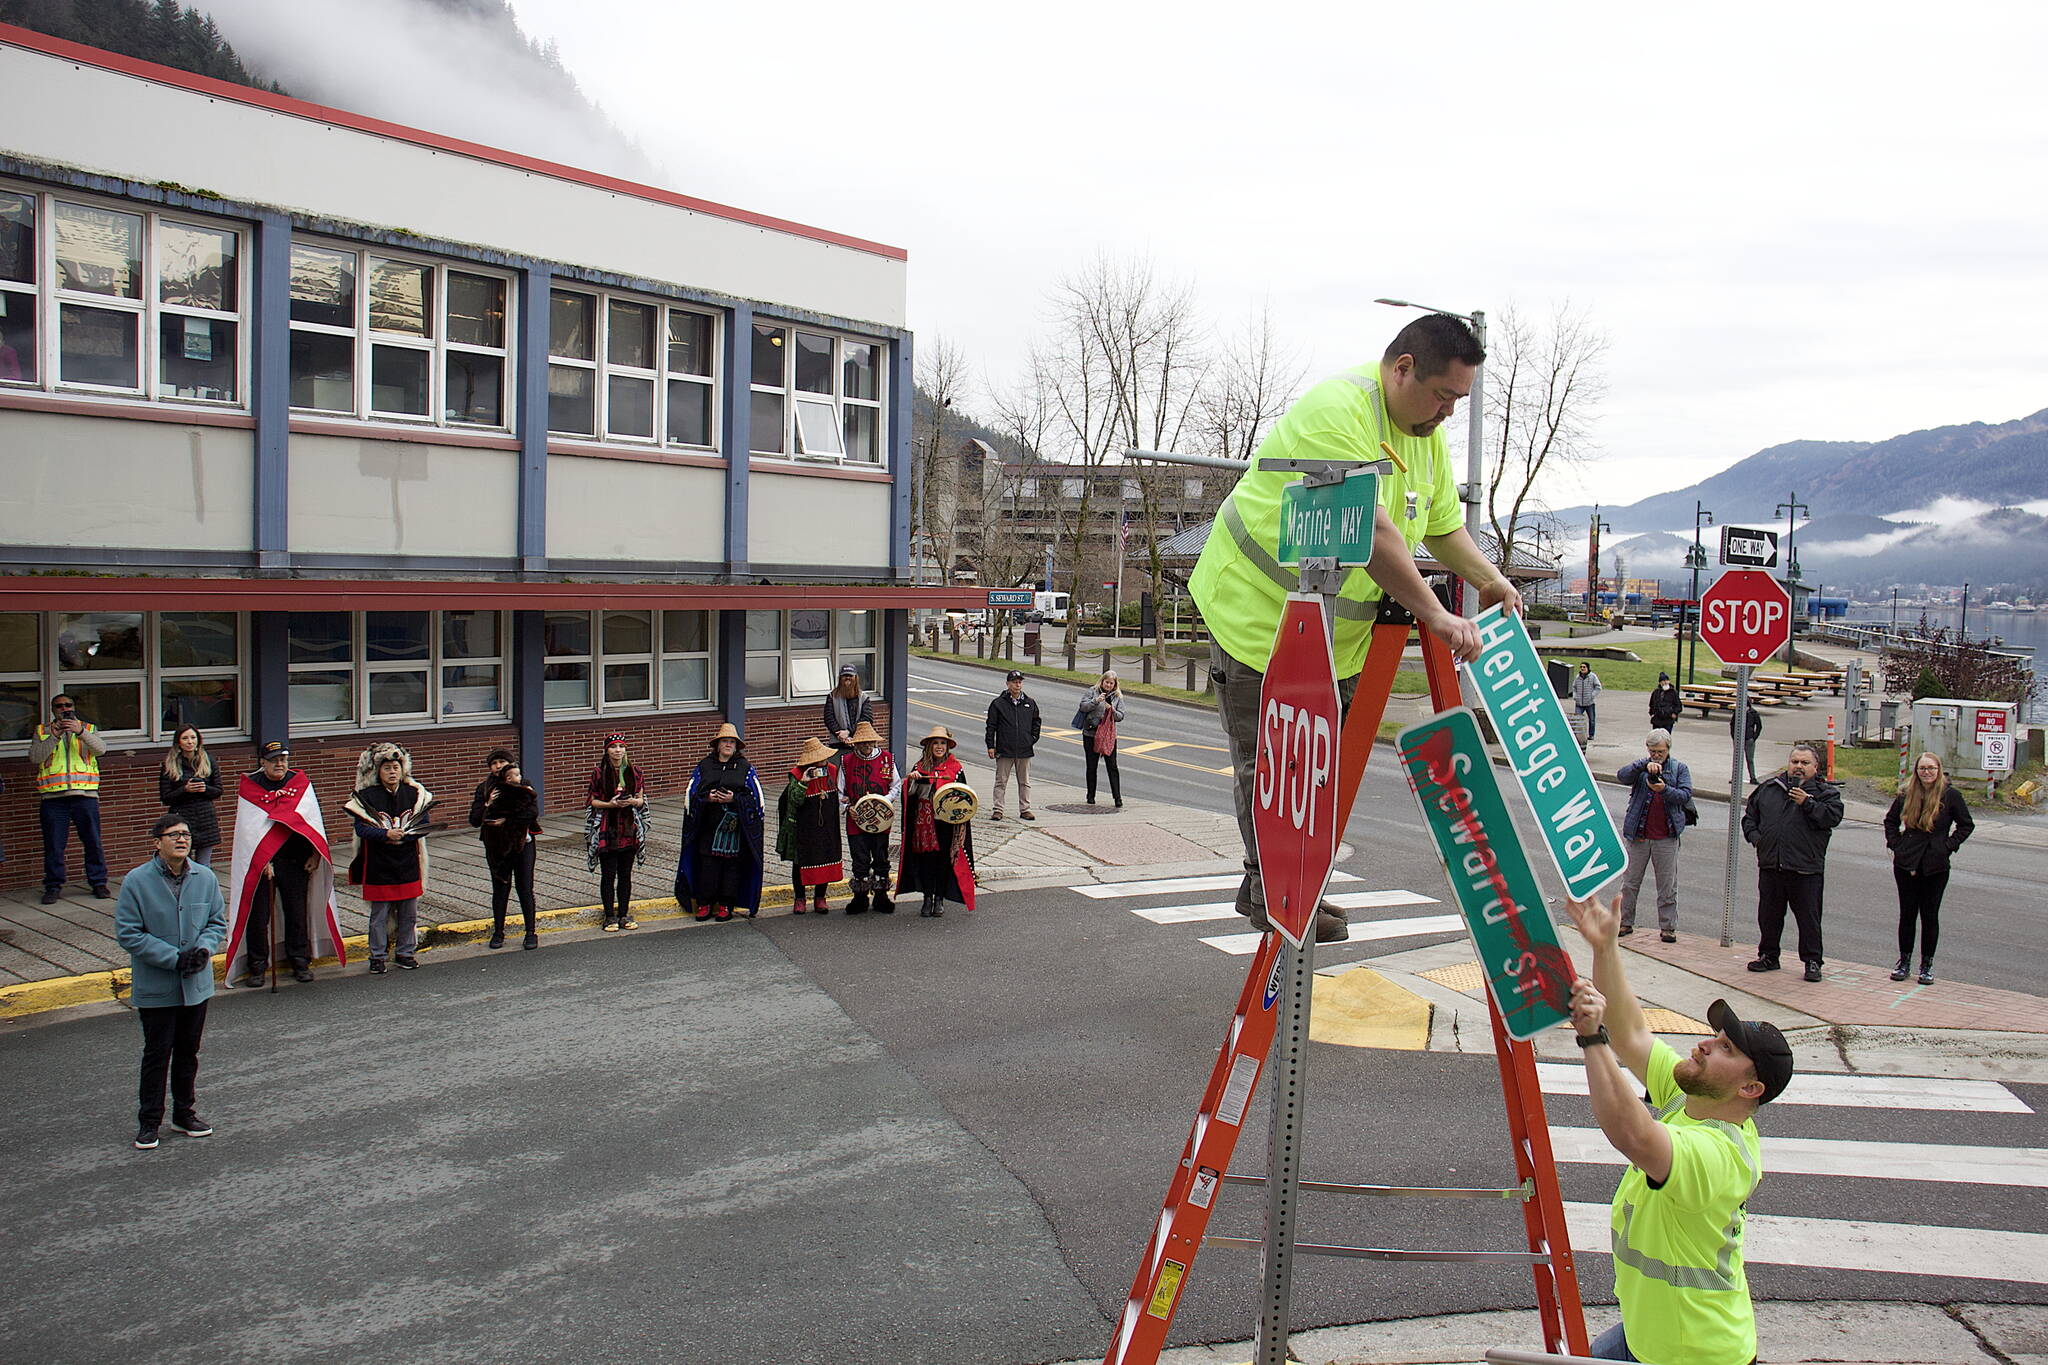 Randal Jim (center) and Joey Ludlam replace a “Seward St.” with a “Heritage Way” sign at midday Wednesday, the day the new name became official for a two-block portion of the downtown street. About 50 local tribal leaders, city officials and others attended a ceremony at Sealaska Plaza marking the name change effort that originated in April. (Mark Sabbatini / Juneau Empire)